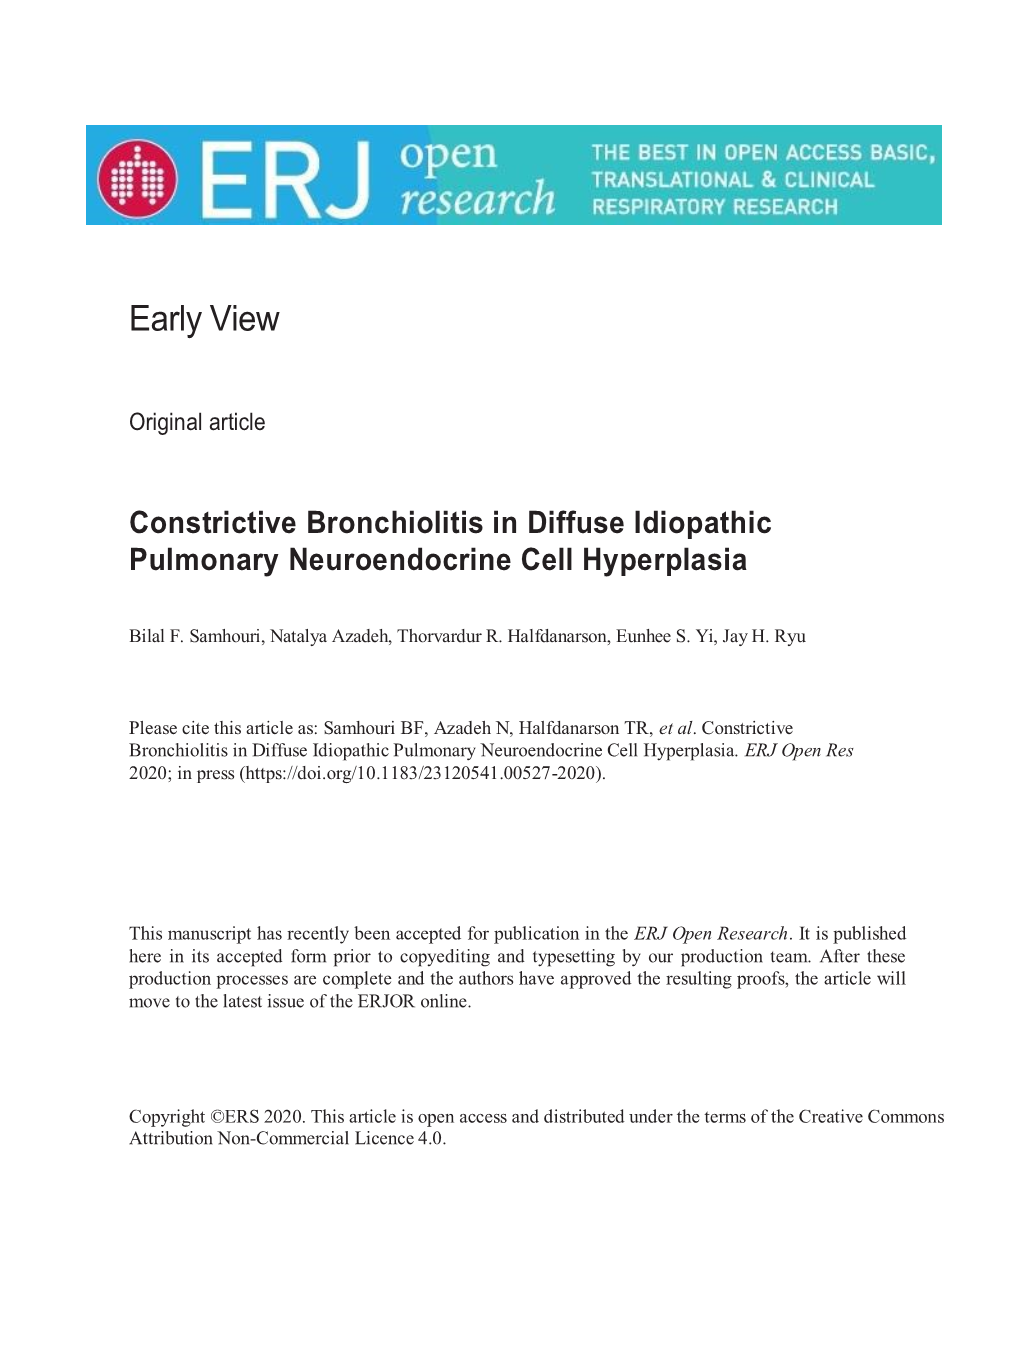 Constrictive Bronchiolitis in Diffuse Idiopathic Pulmonary Neuroendocrine Cell Hyperplasia